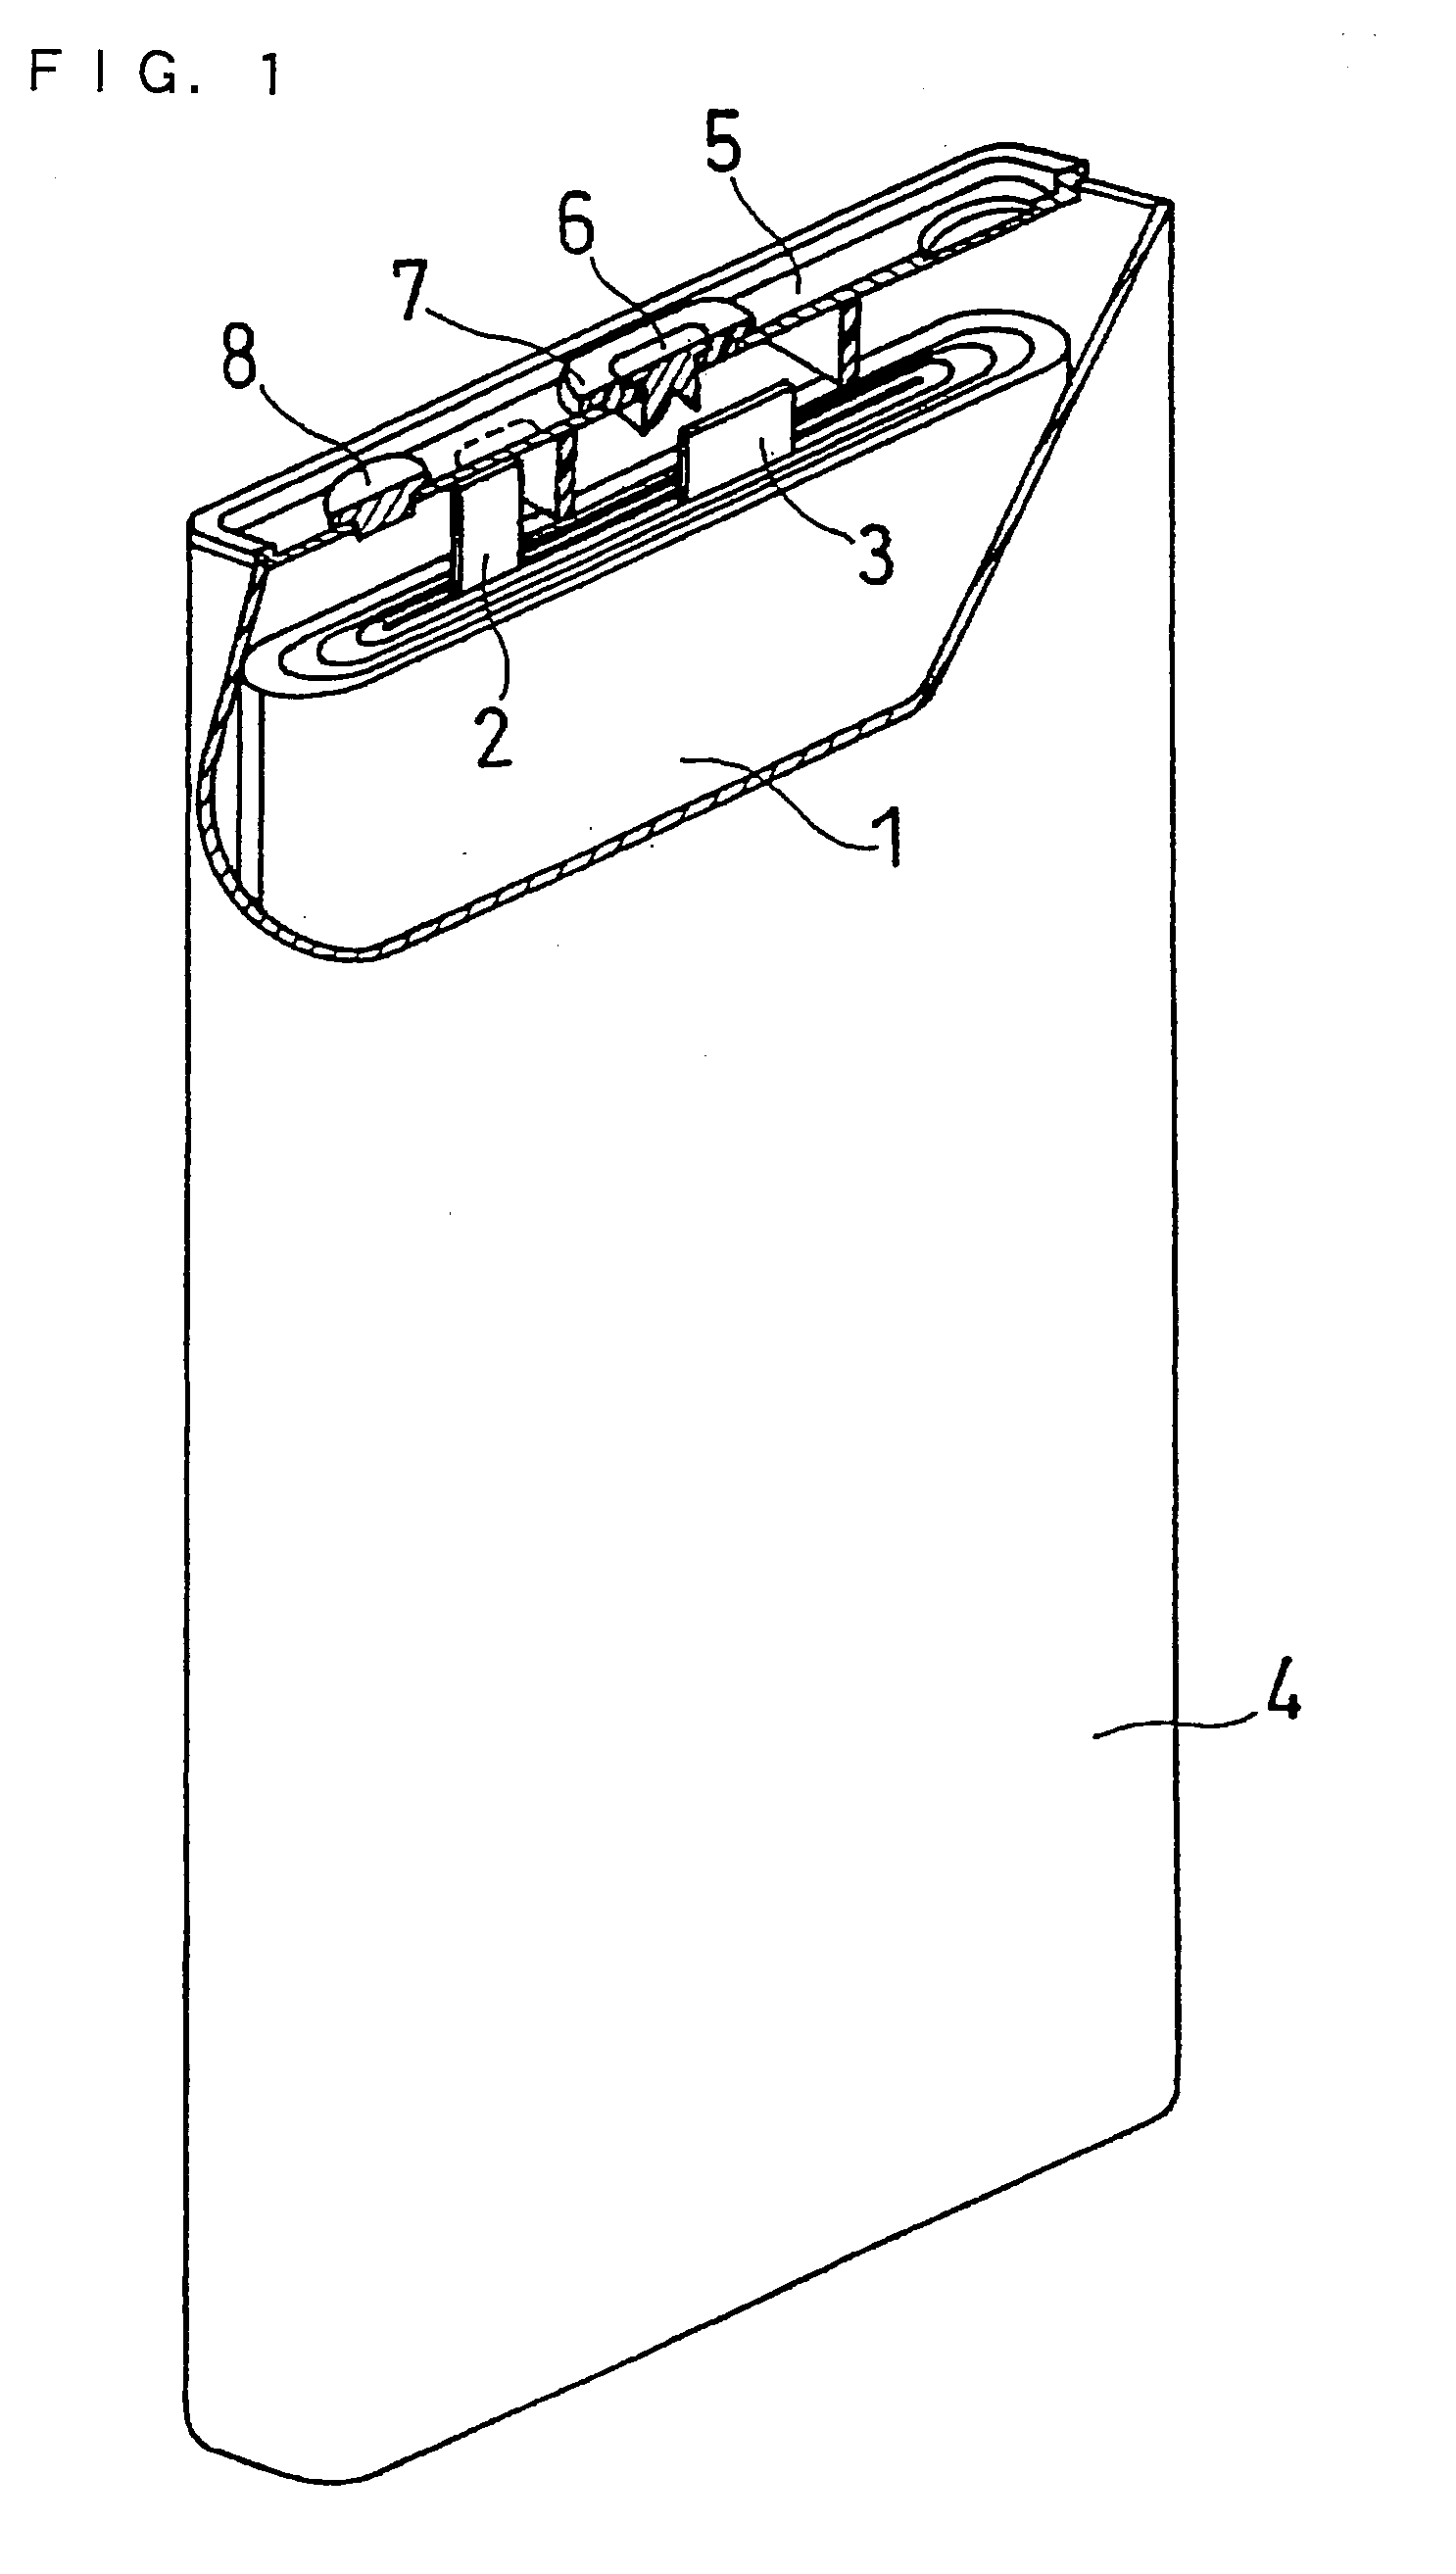 Non-Aqueous Electrolyte and Secondary Battery Containing the Same